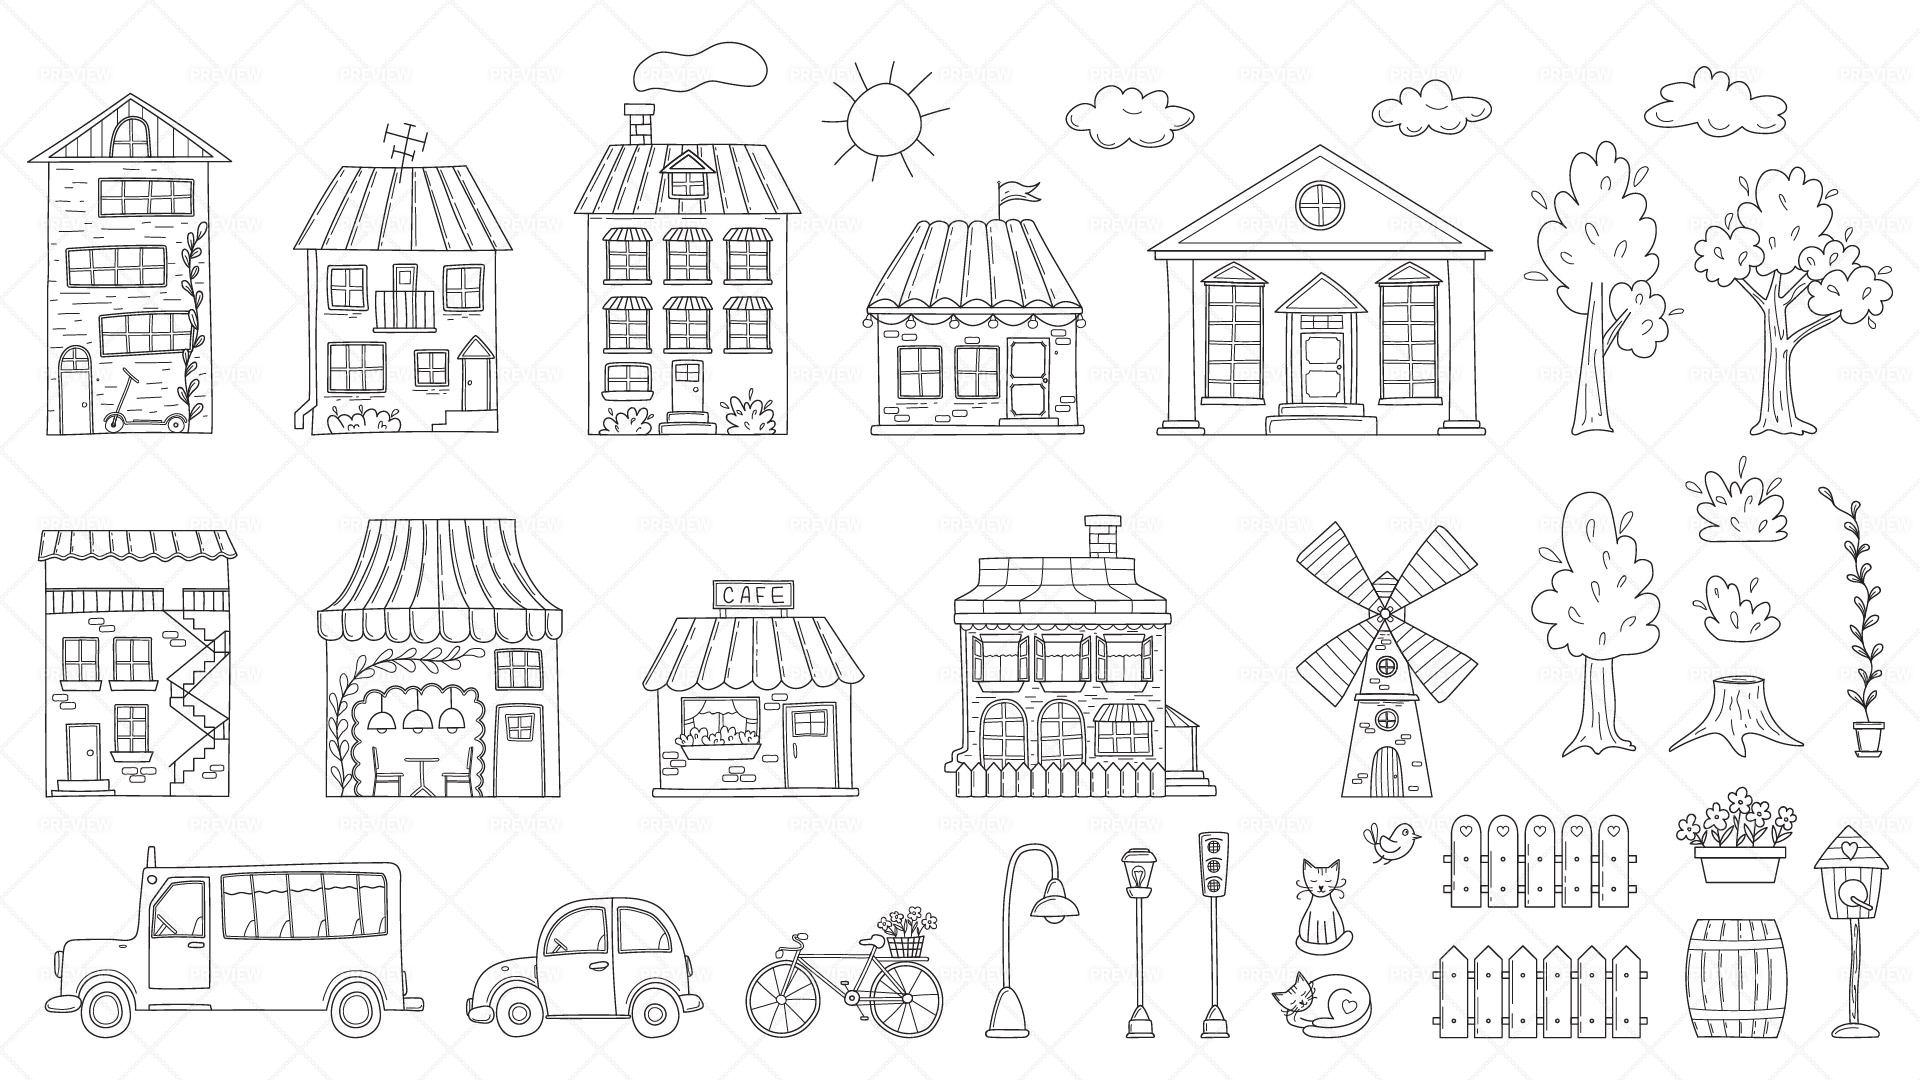 OUR HOUSES (DIFFERENT TYPE OF HOUSES) | Art history projects for kids, Book  art projects, Art for kids